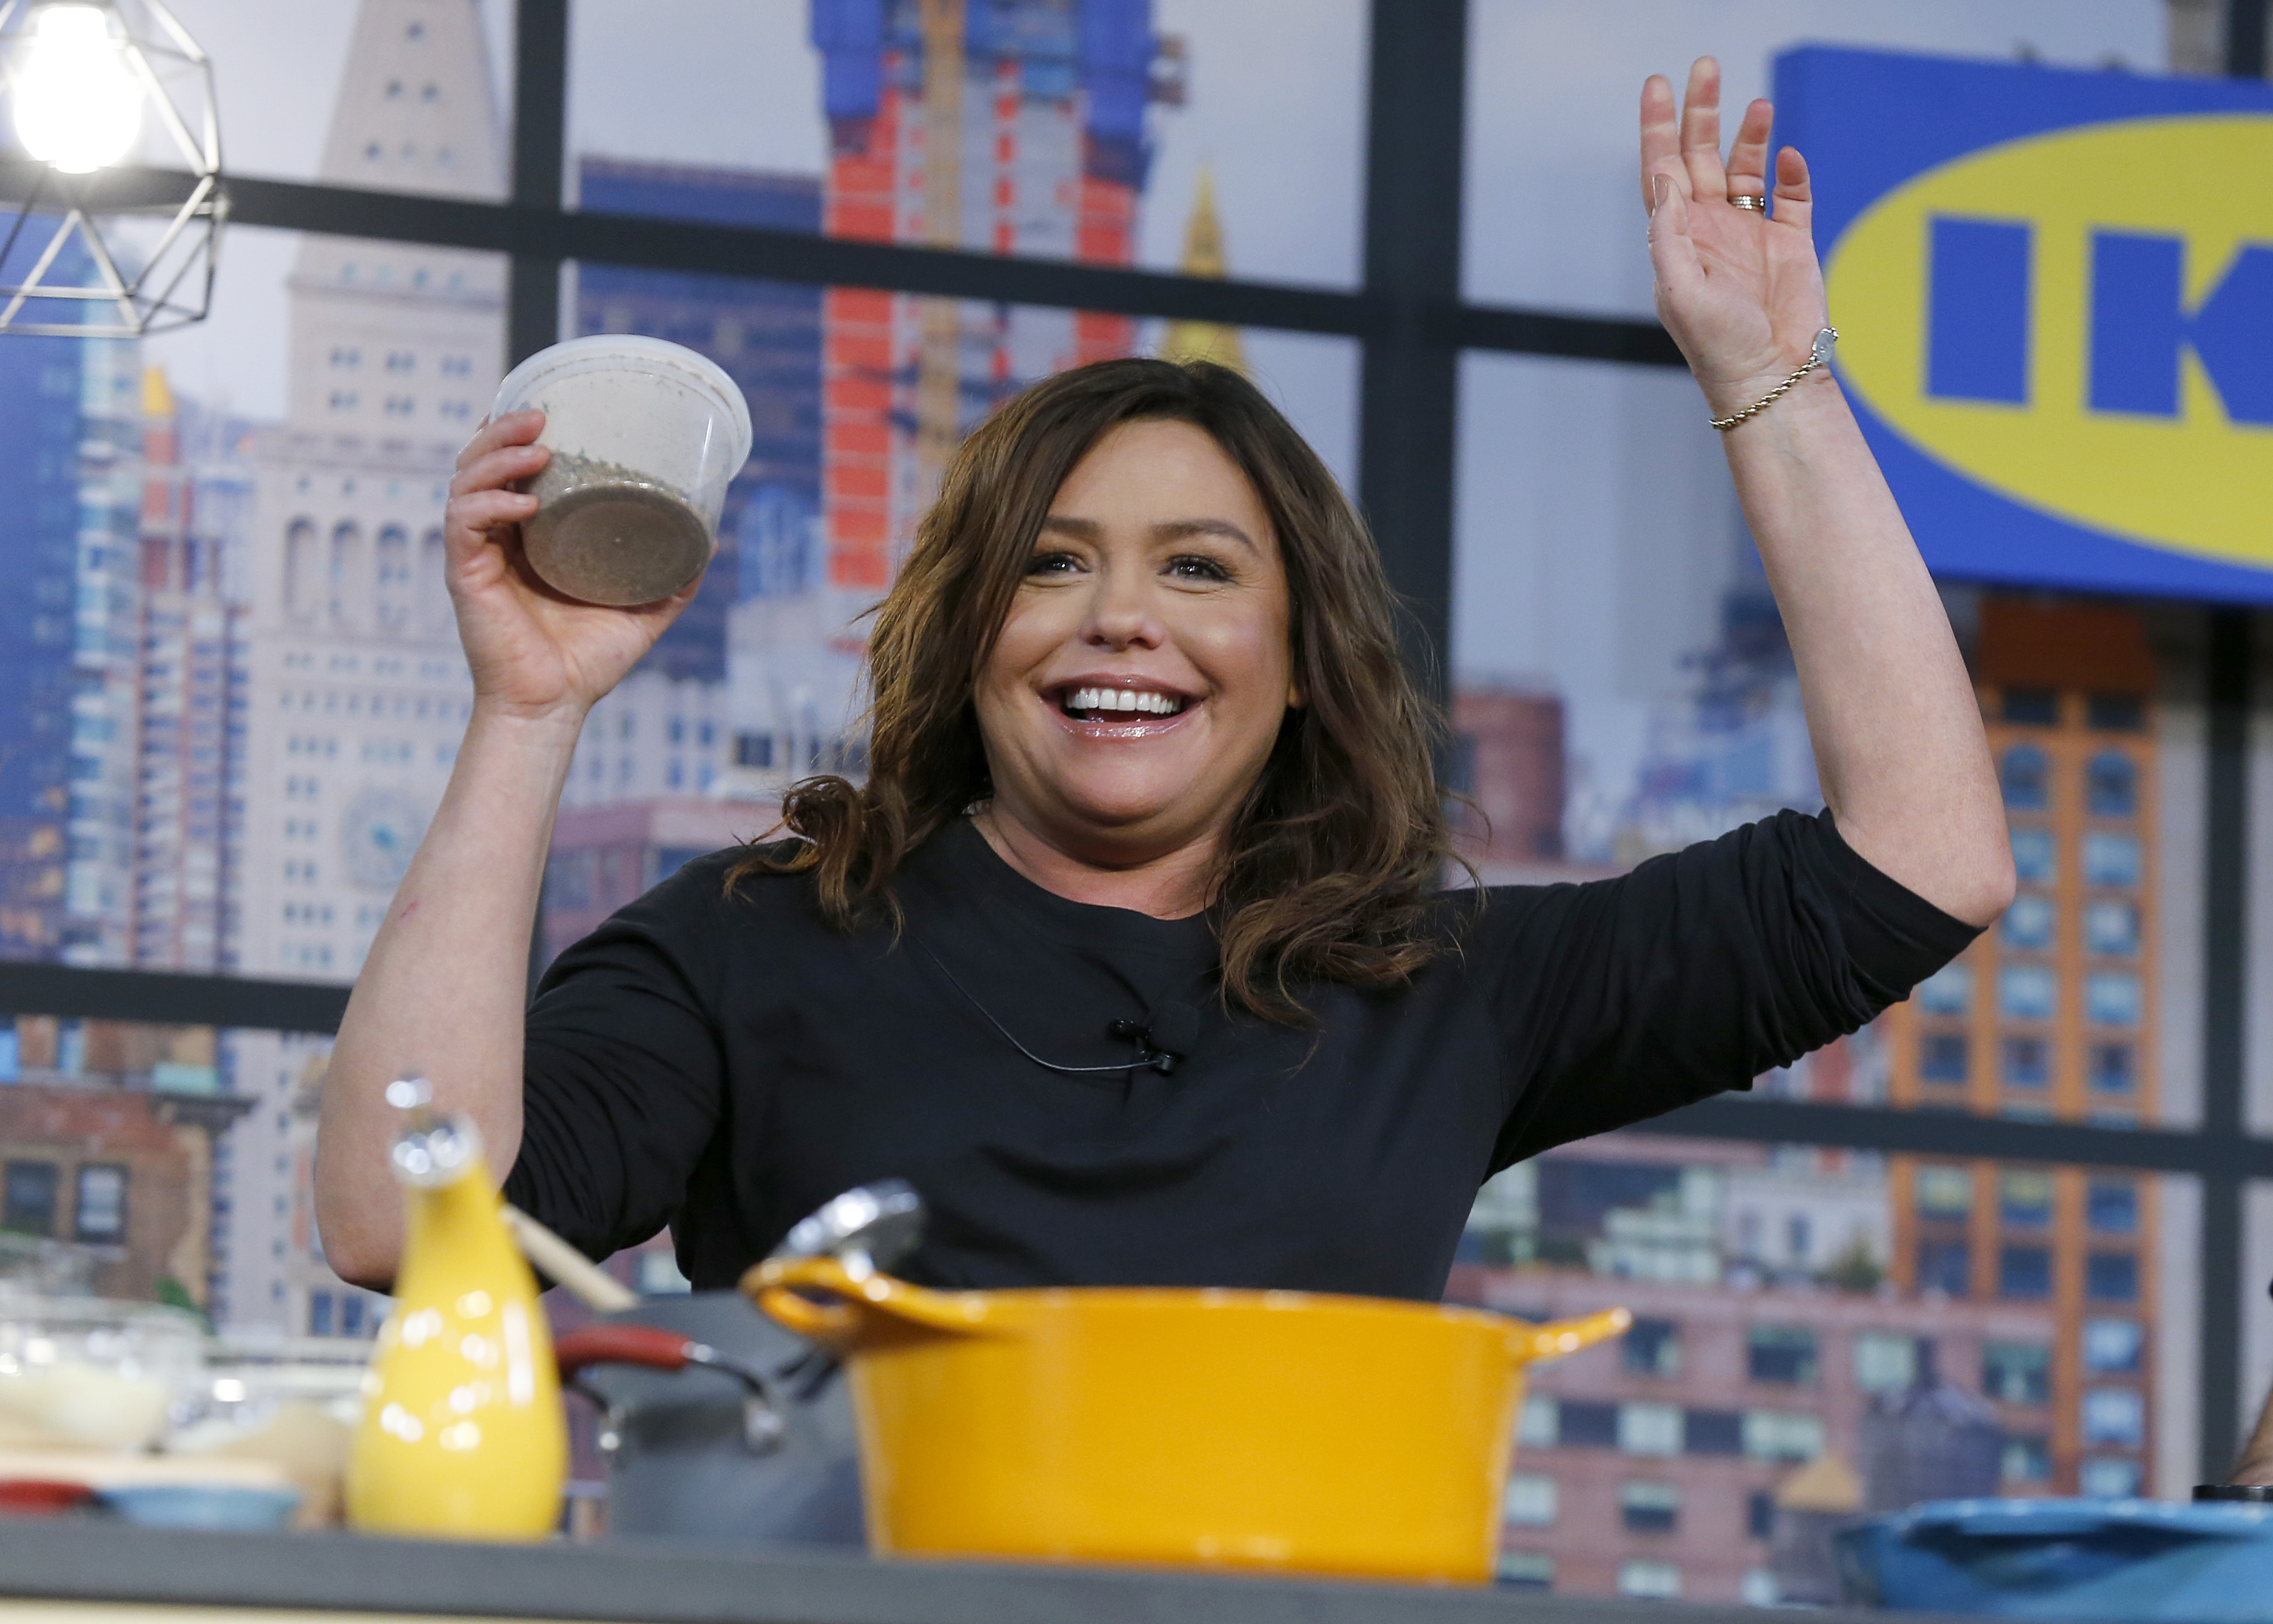 Food Network star Rachael Ray onstage during a culinary demonstration at the Grand Tasting presented by ShopRite featuring Culinary Demonstrations at The IKEA Kitchen presented by Capital One at Pier 94 